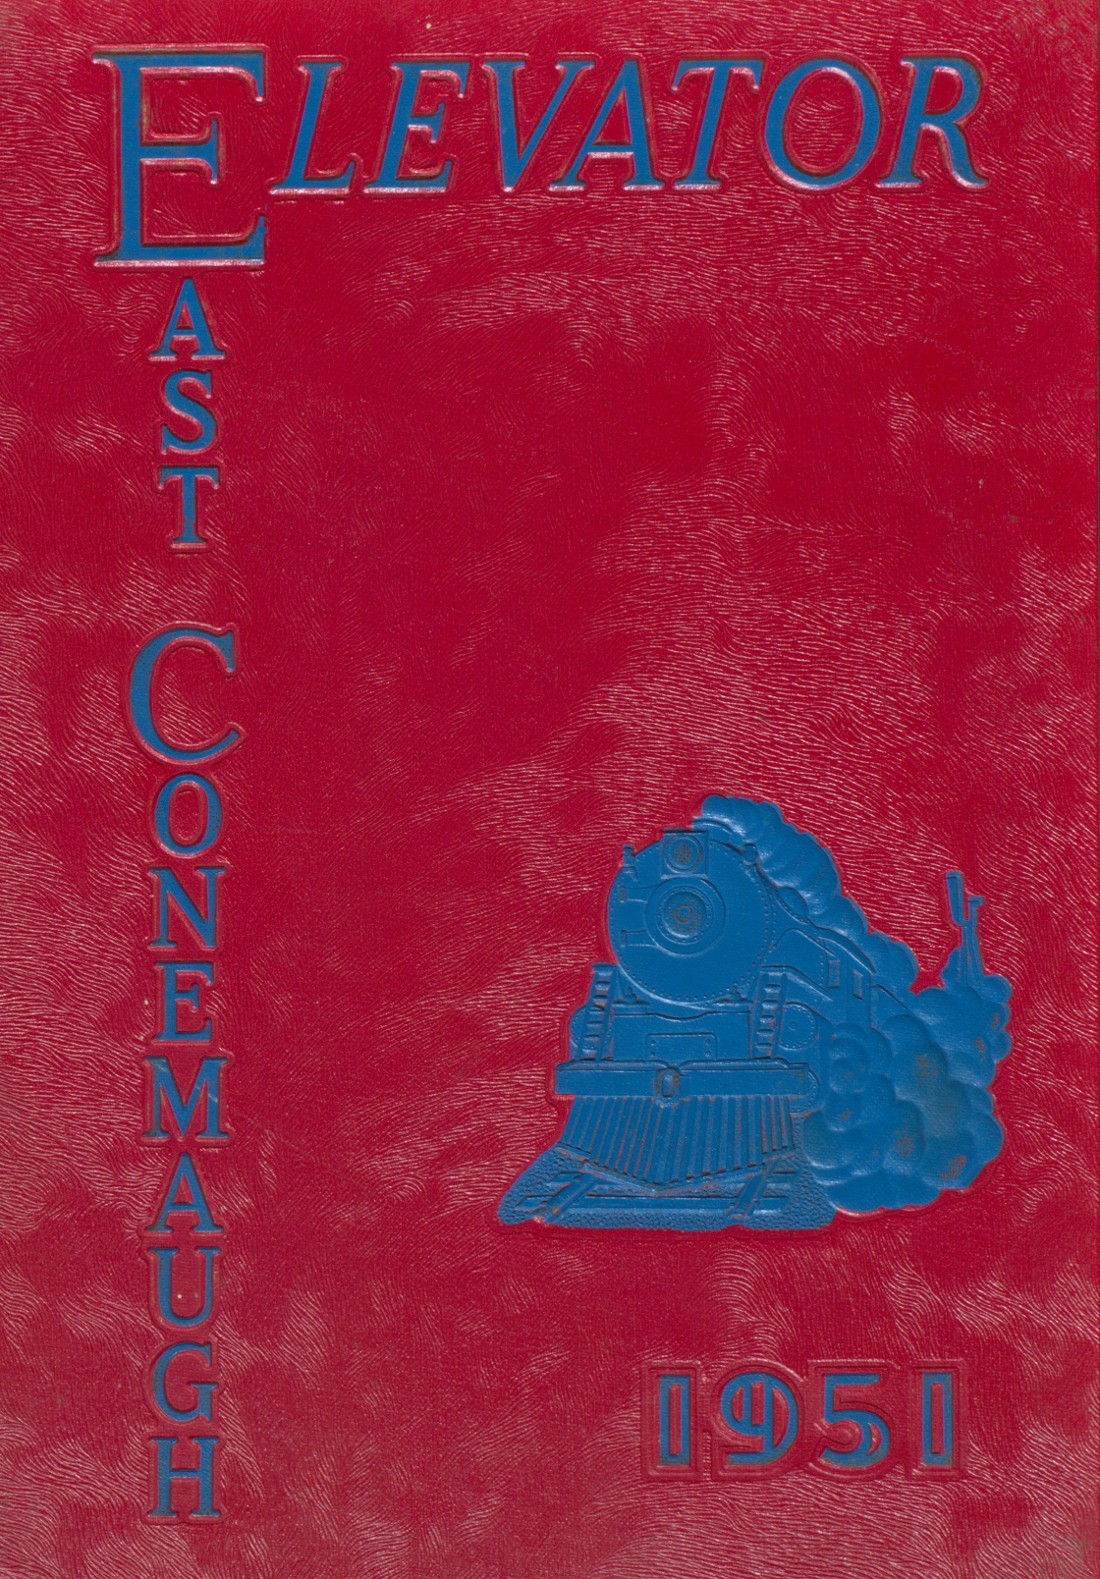 1951 yearbook from East Conemaugh High School from Conemaugh